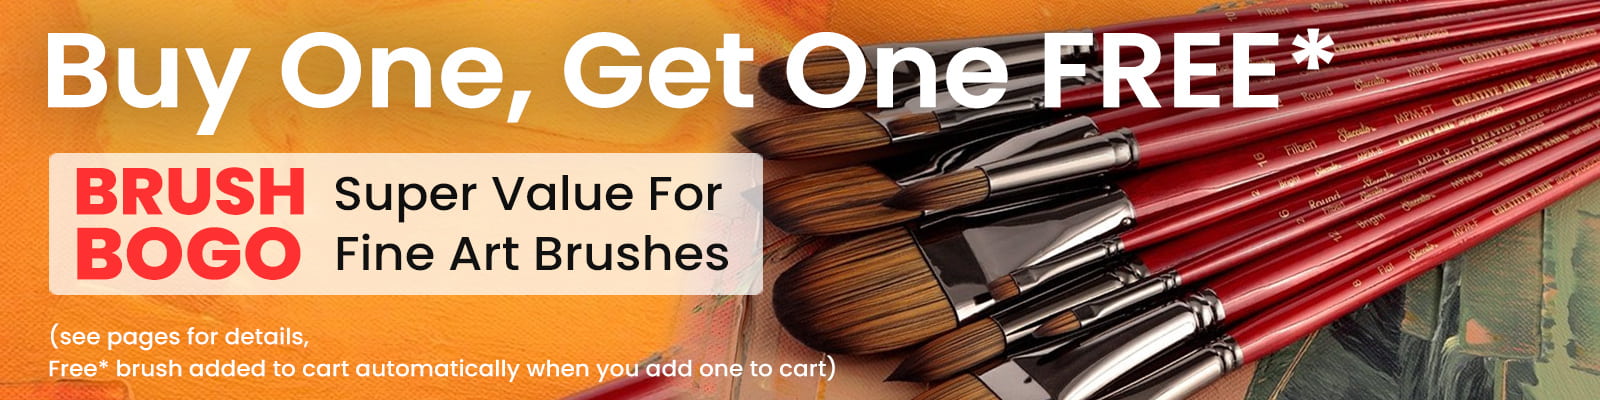 Buy One, Get One FREE - Special Value for Fine Art Brushes